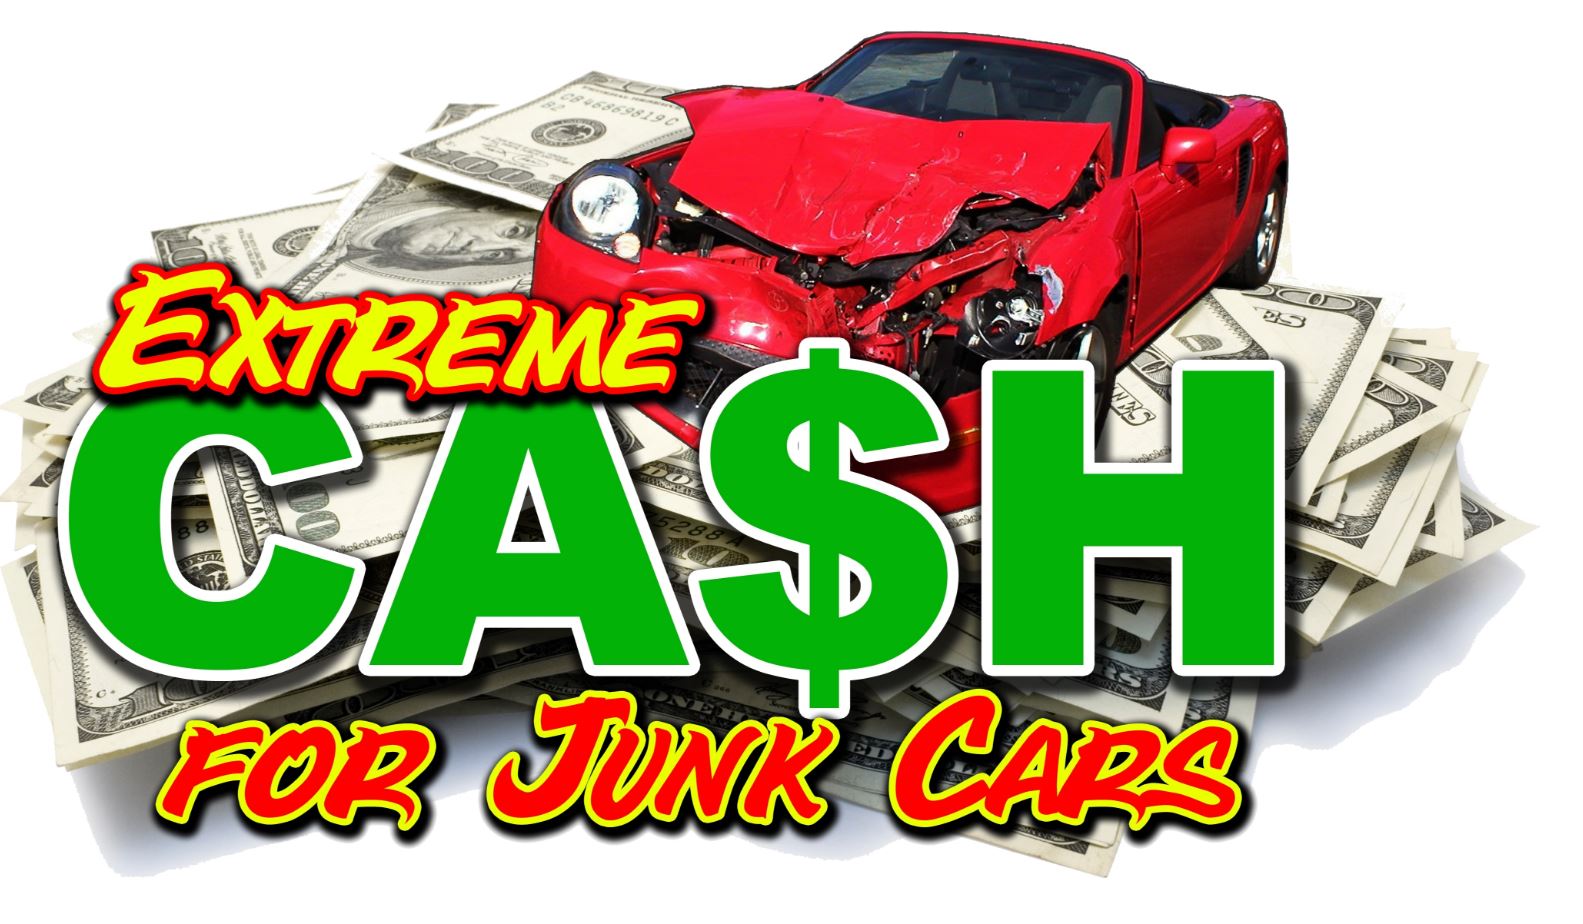 Extreme Cash For Junk Cars